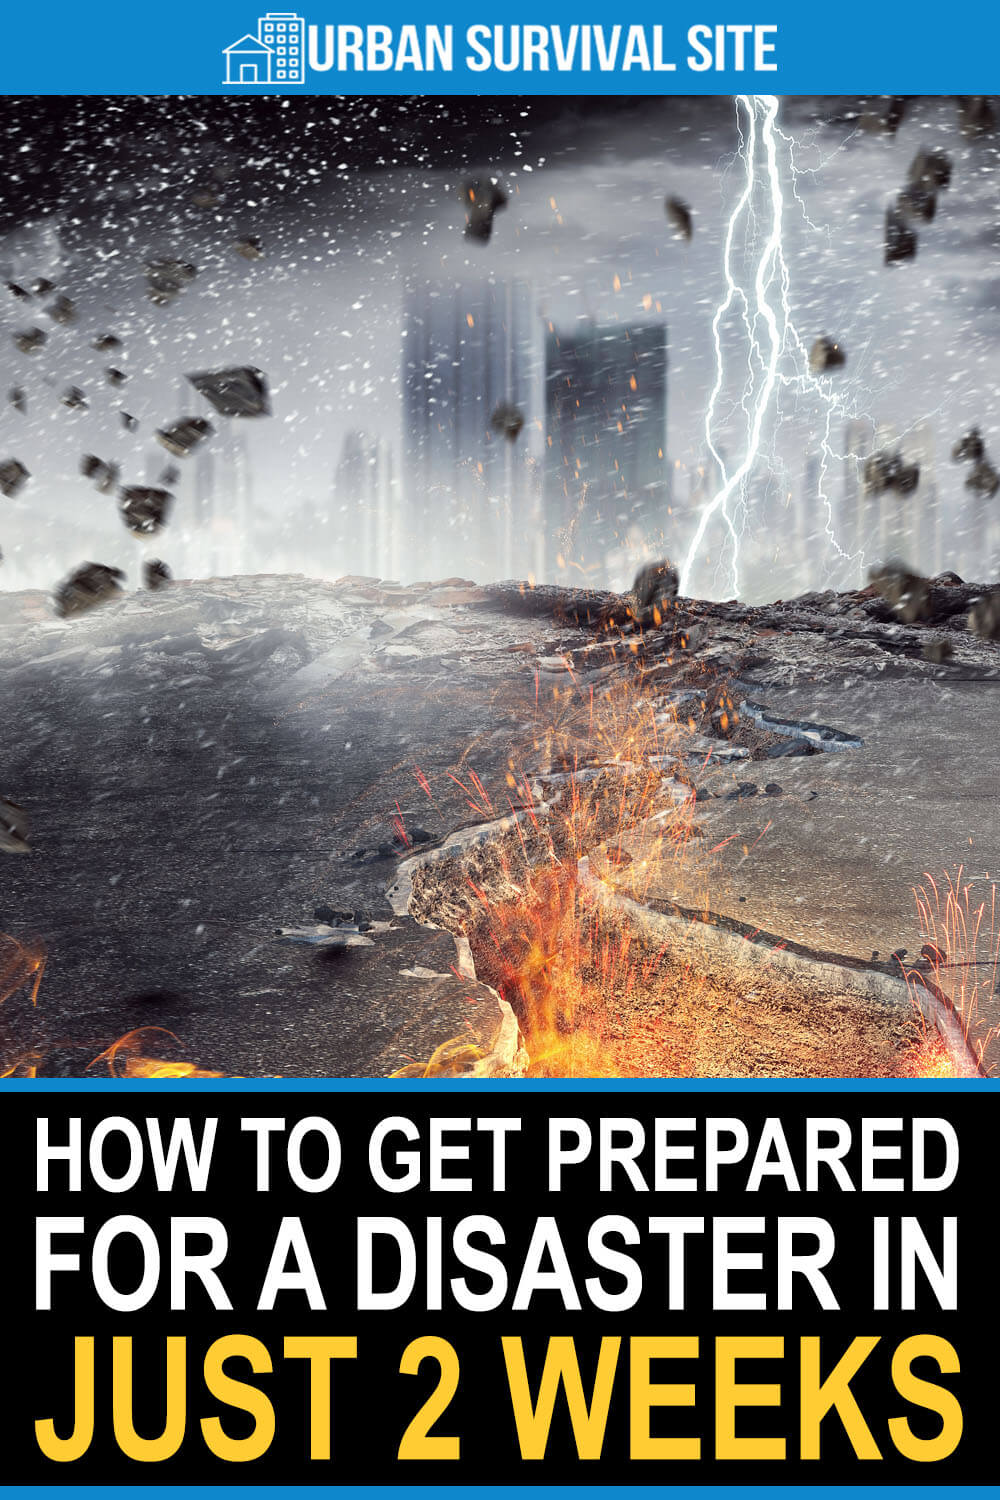 How to Get Prepared for a Disaster in Just 2 Weeks